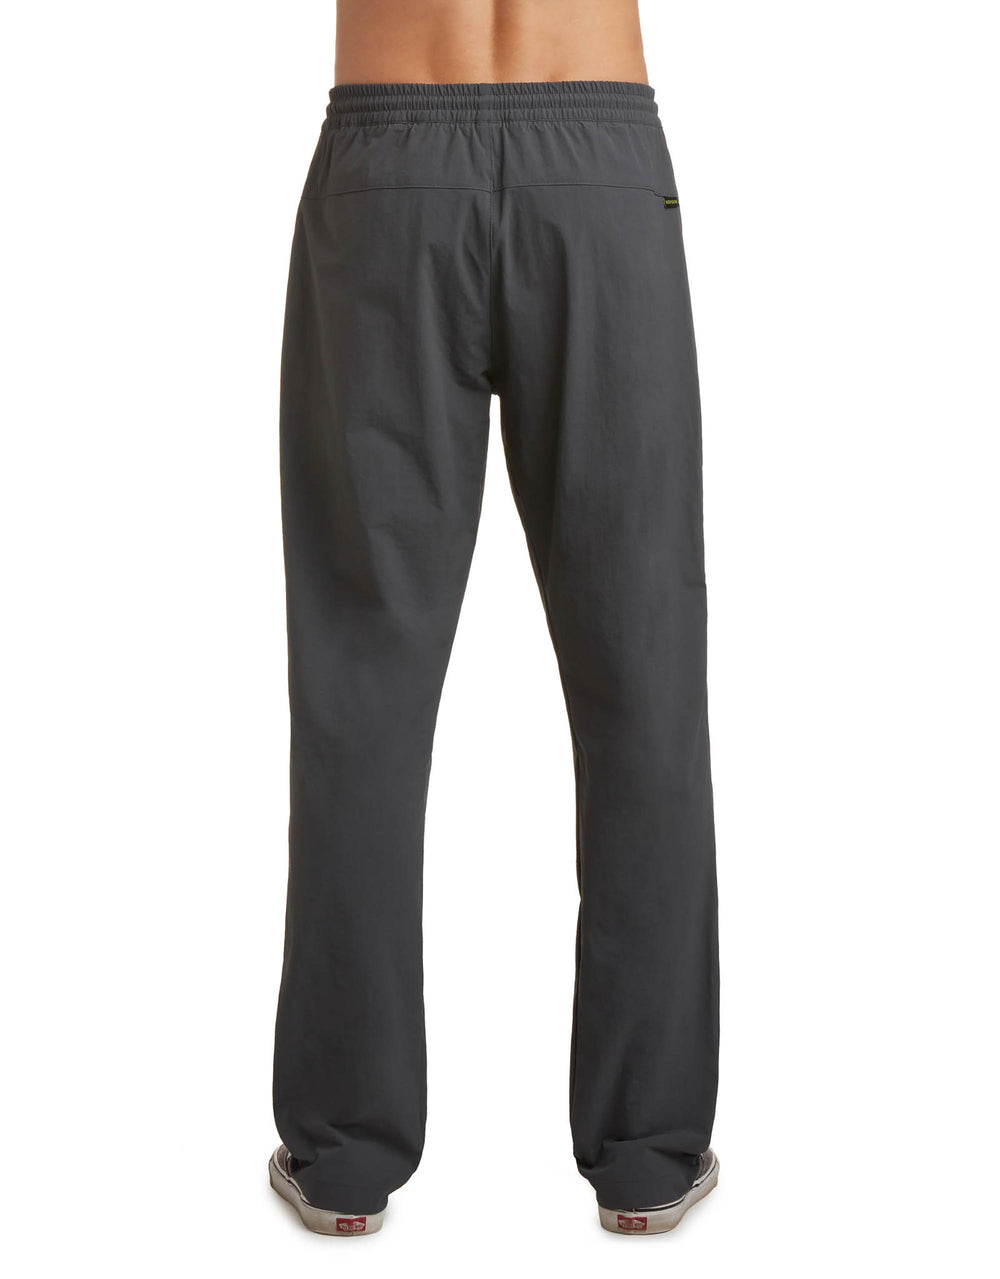 Trainers Hybrid Track Pant - Charcoal